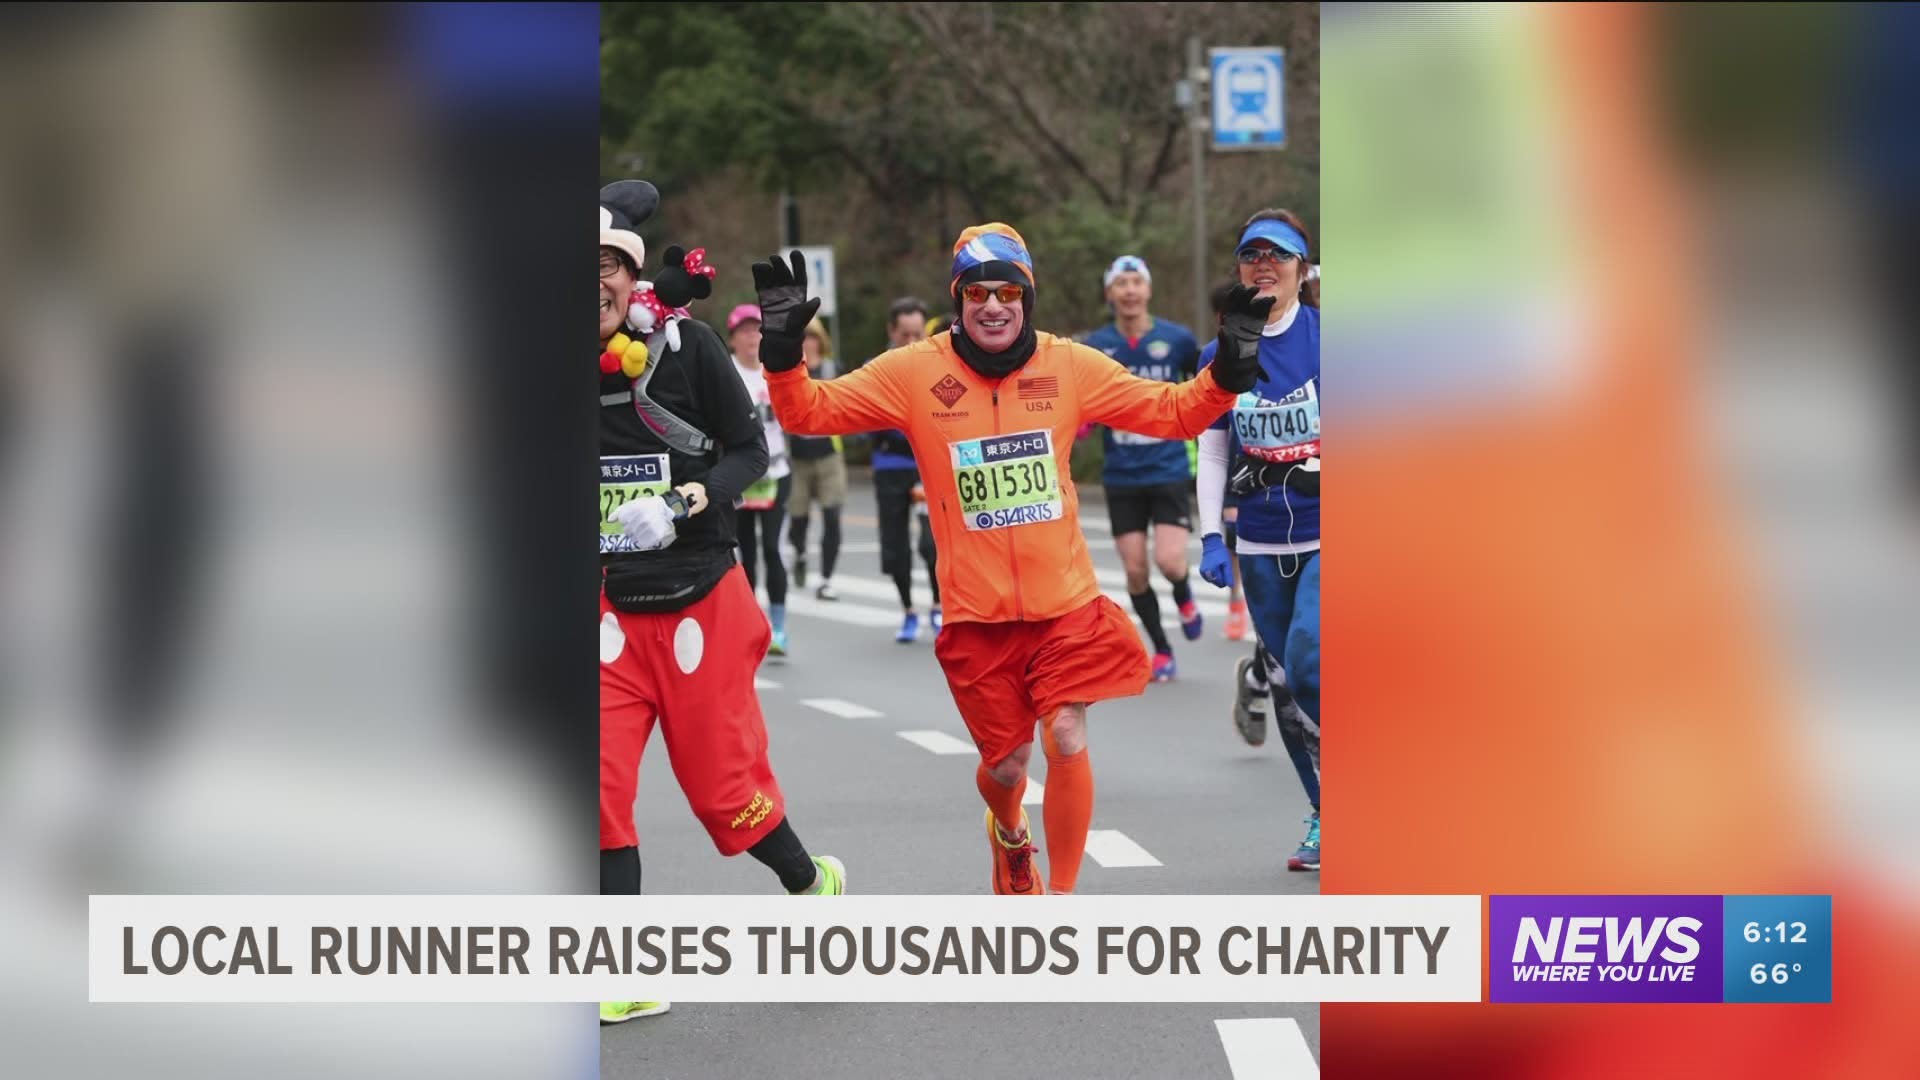 Local Runner raises thousands for charity.